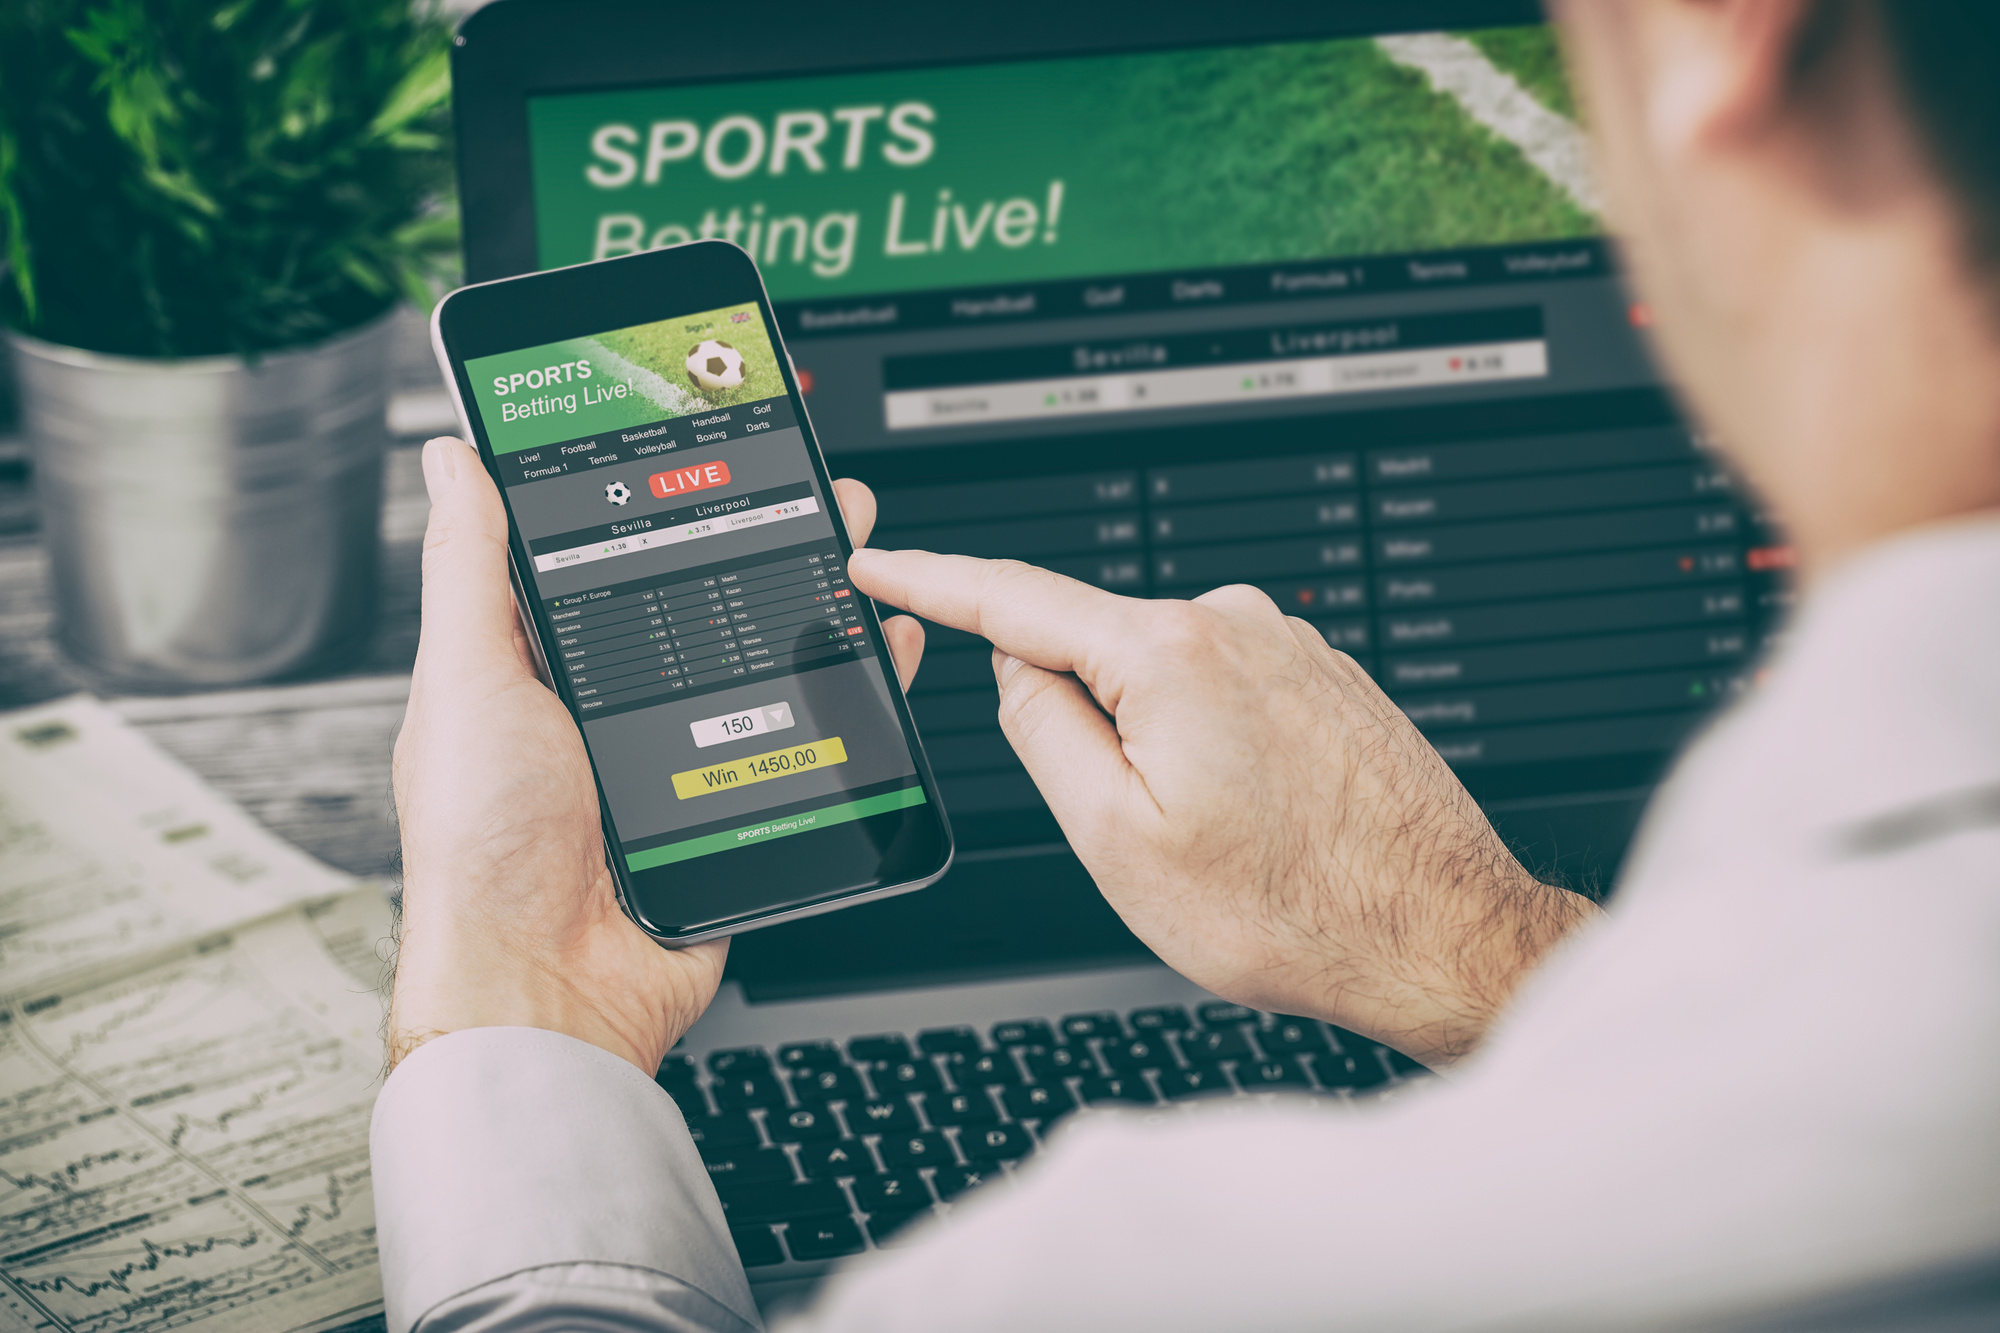 Are you interested in learning more about sports betting? Click here for a beginner's guide to sports betting strategies that will have you betting like a pro.